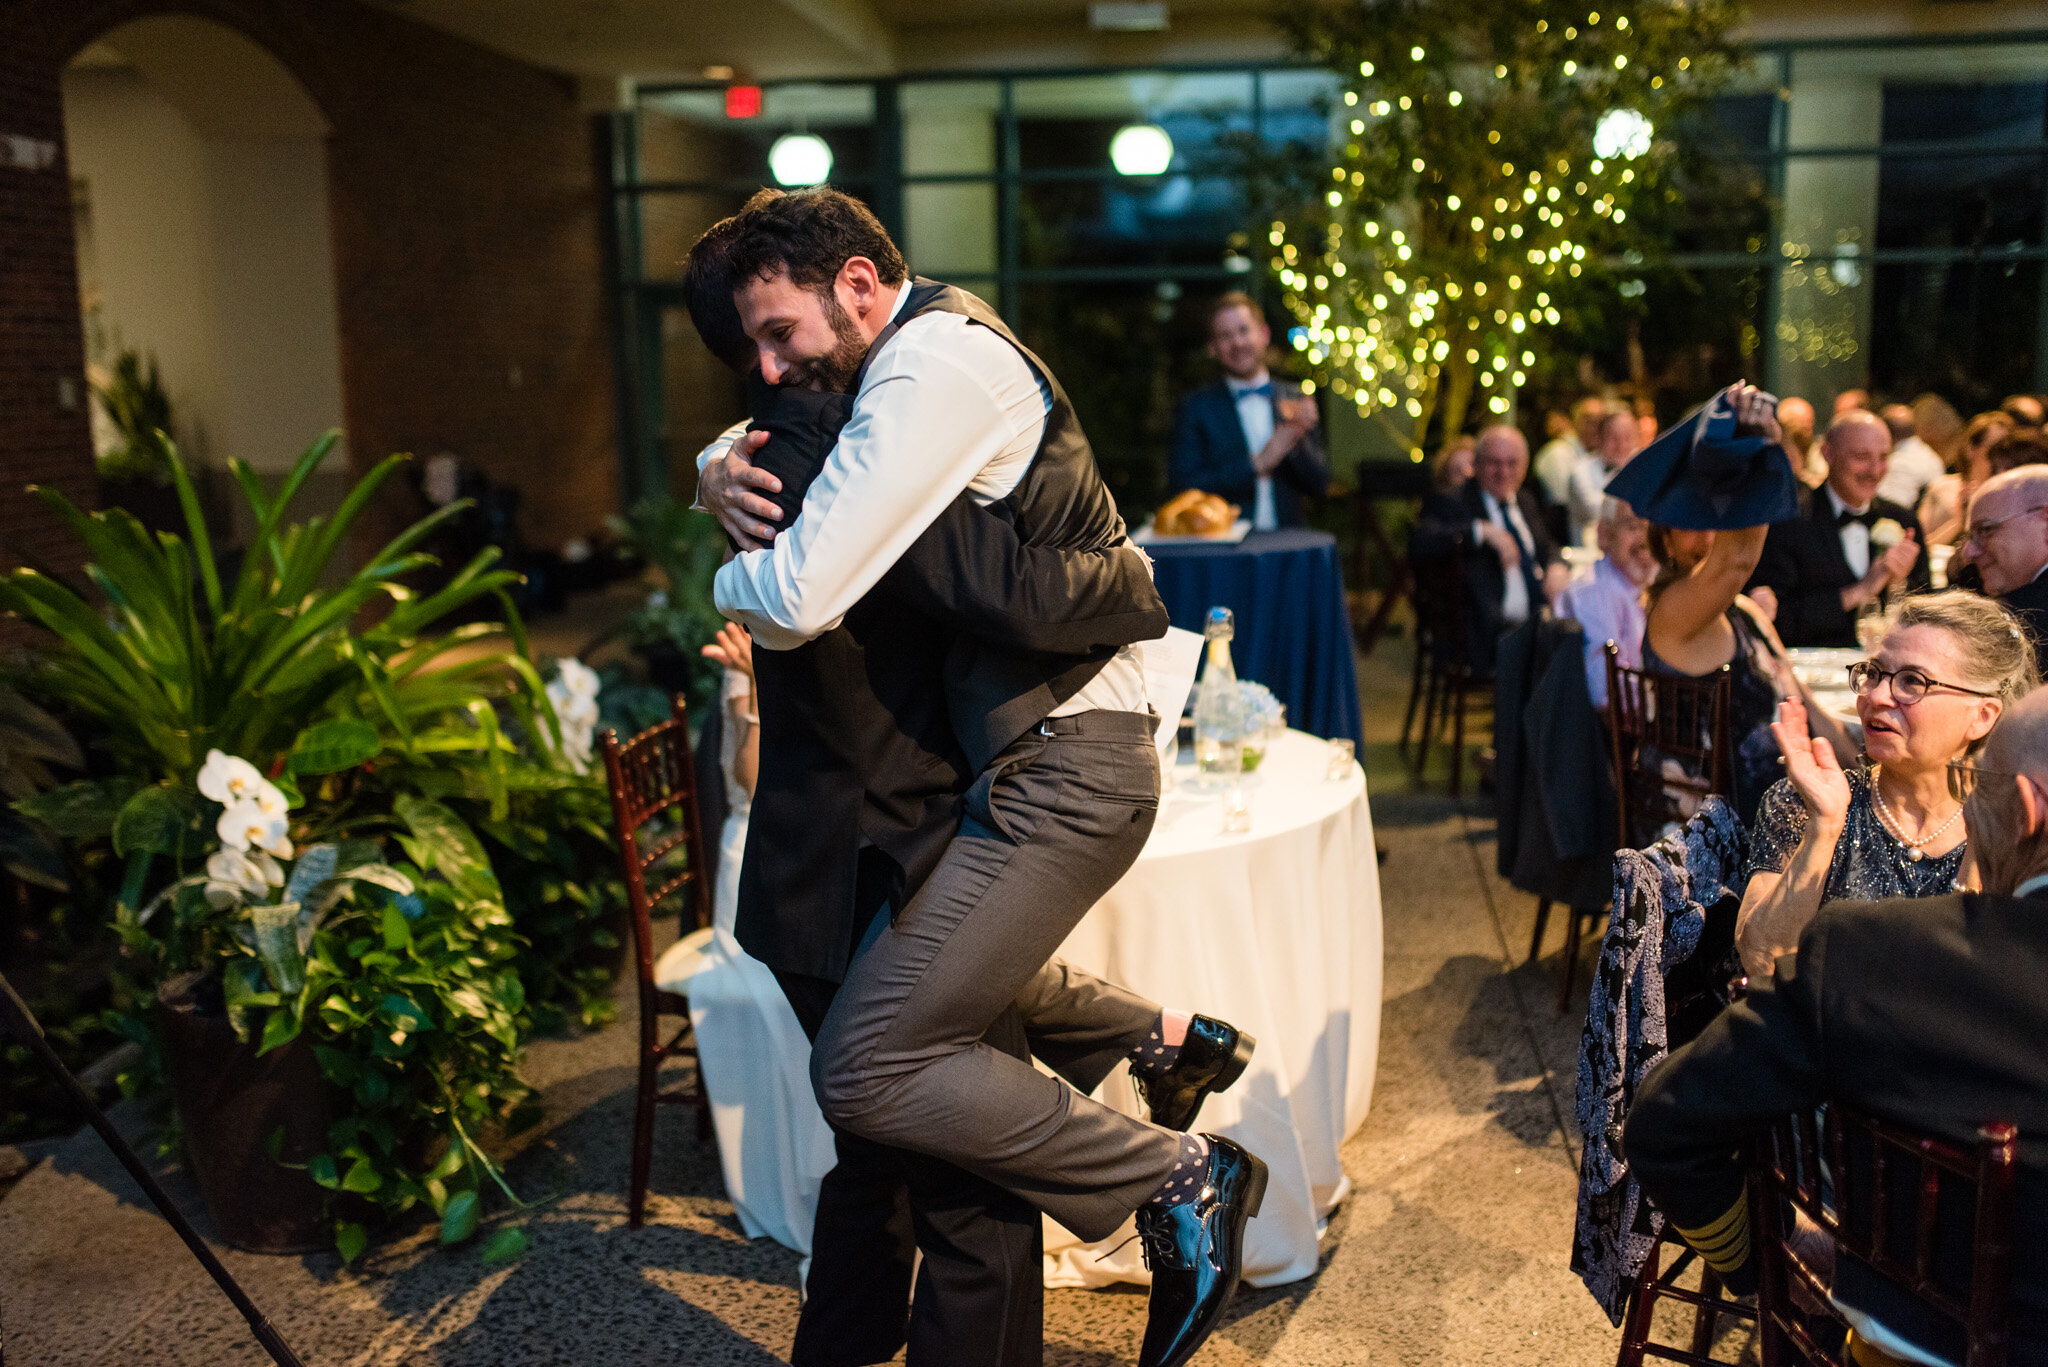 The groom hugs his best man at his wedding reception